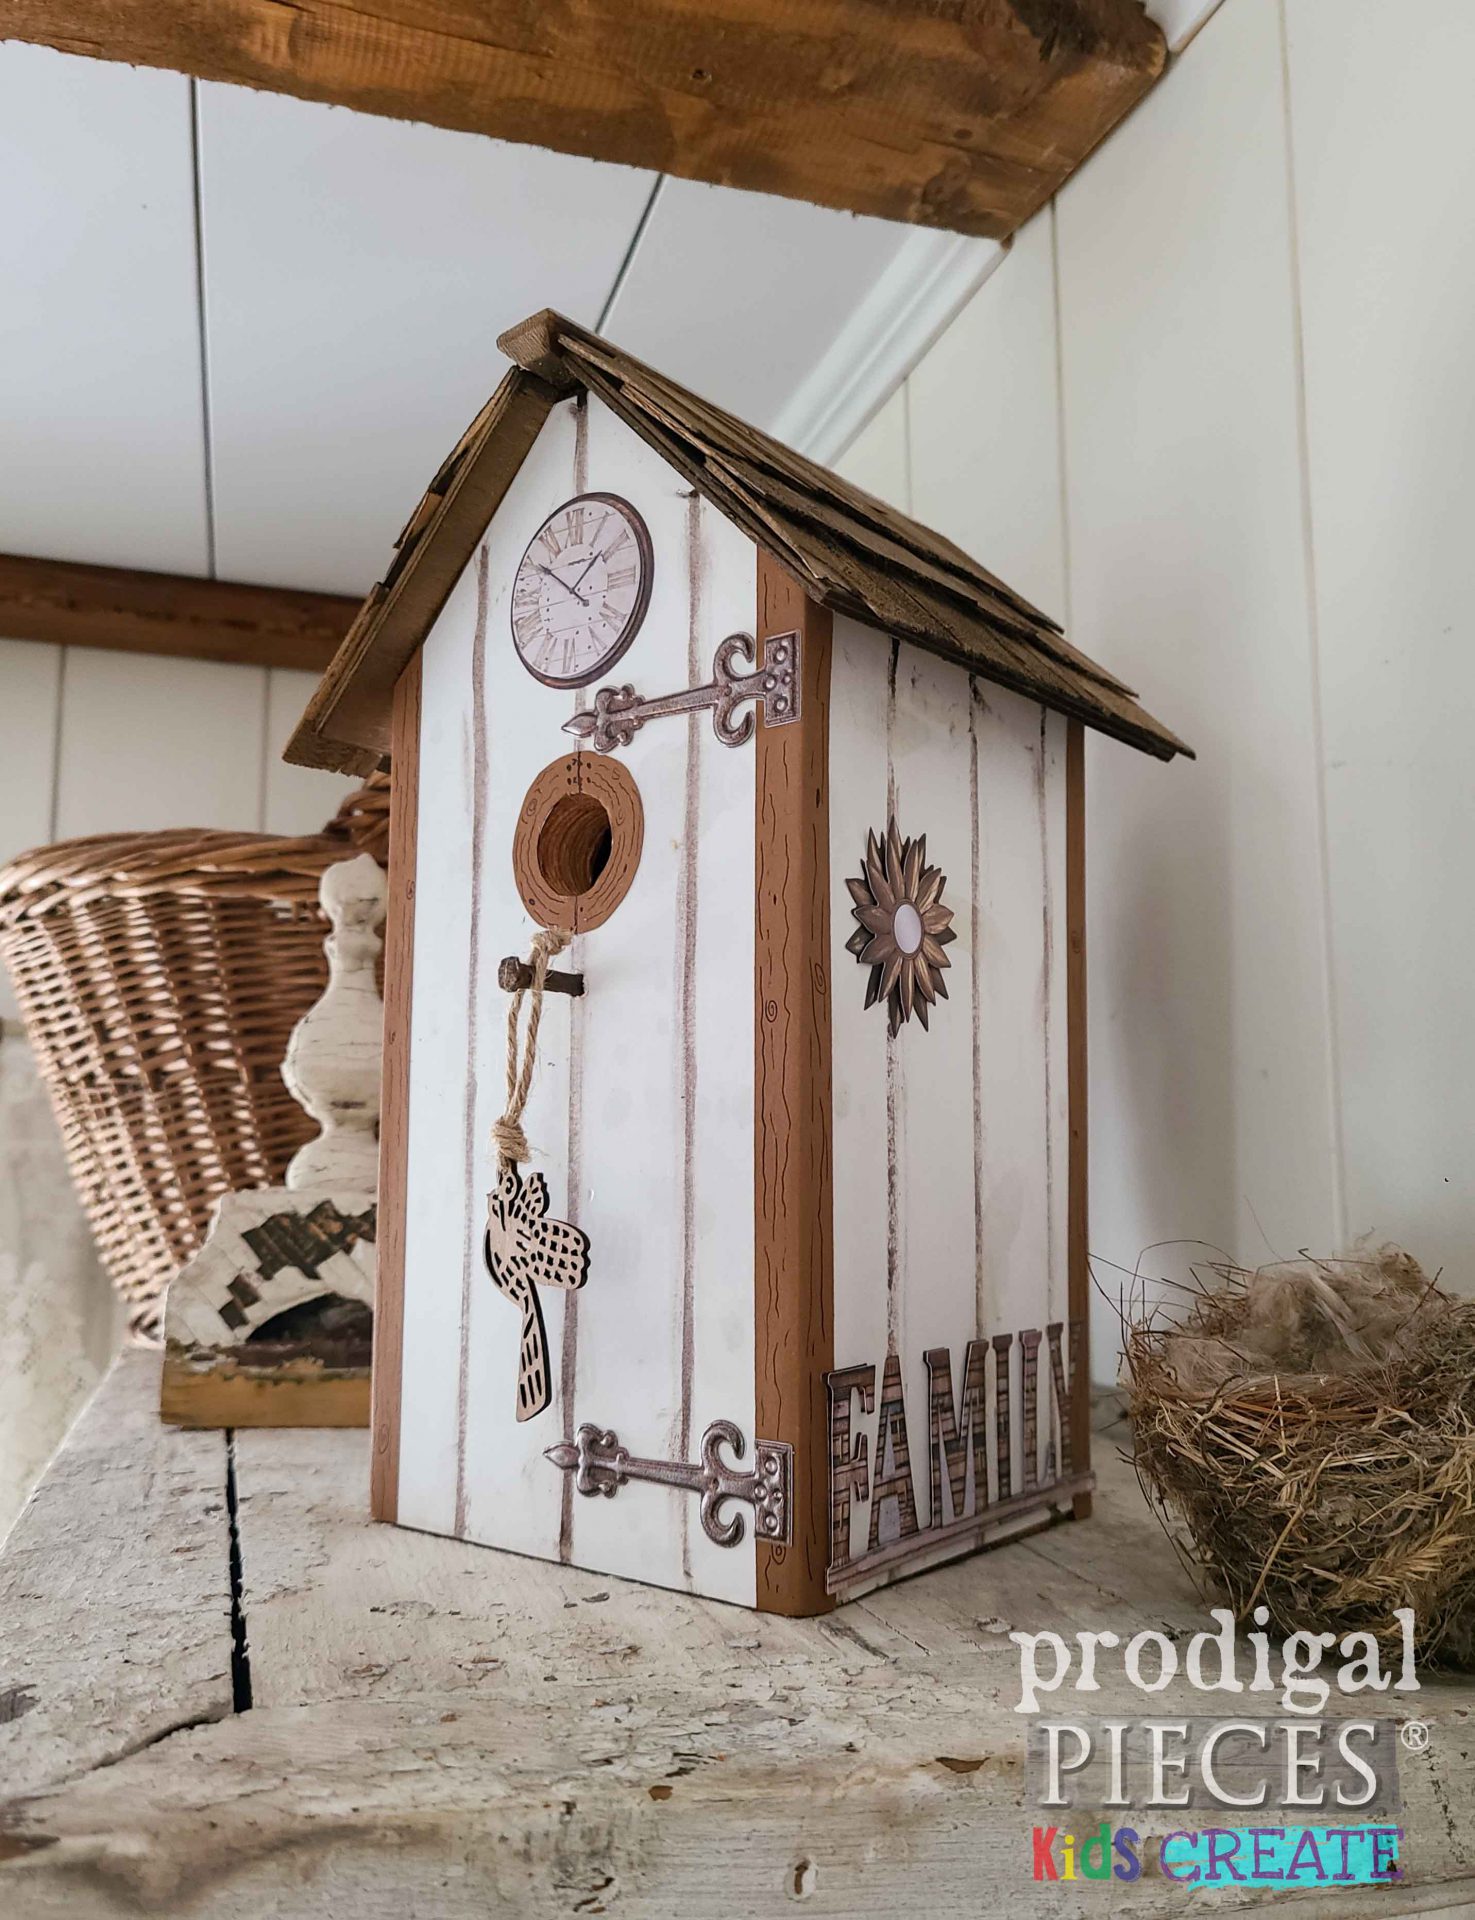 Barn Siding Birdhouse with DIY Tutorial for KIDS Create with Prodigal Pieces | prodigalpieces.com #prodigalpieces #diy #woodworking #farmhouse